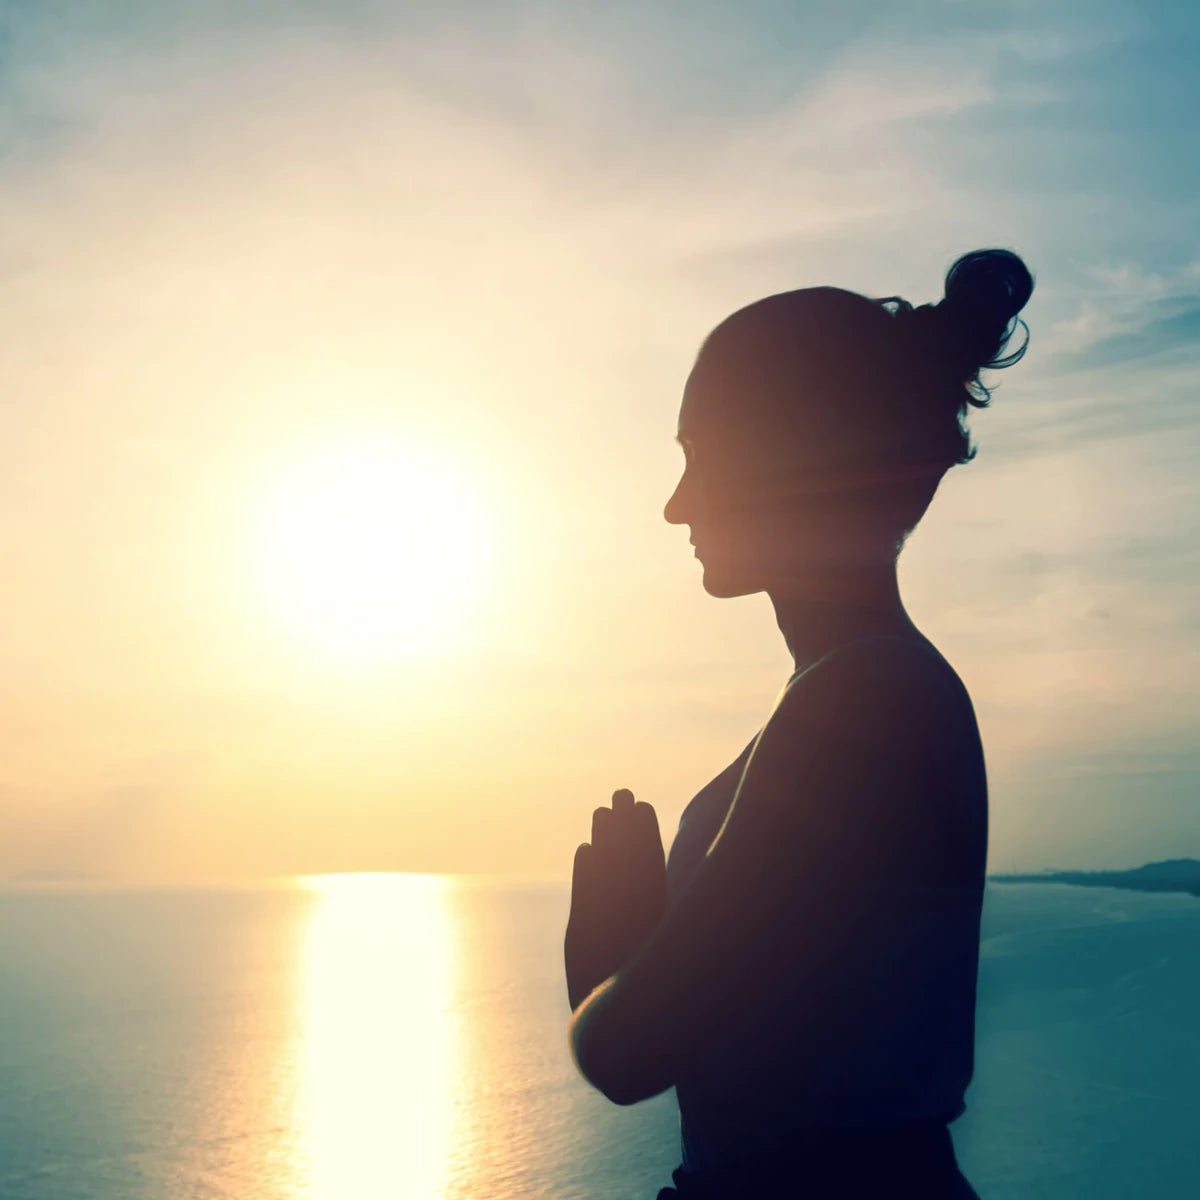 Lady at sunset practicing yoga with hands in a prayer position, anjali mudra